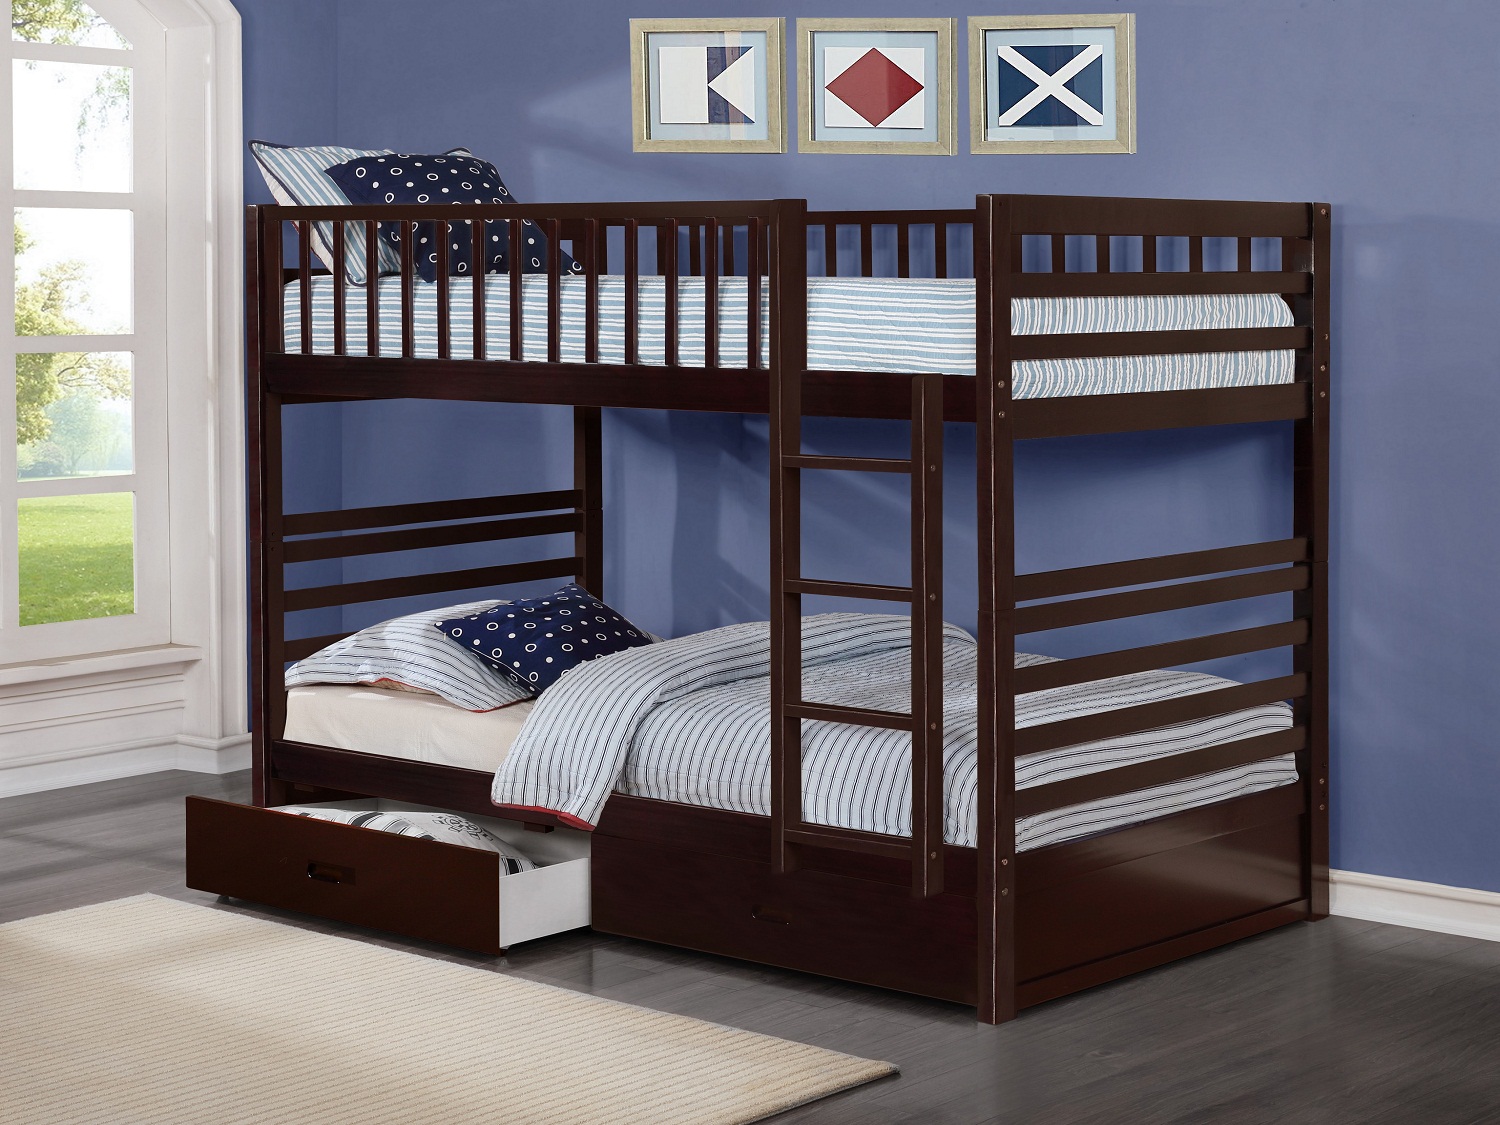 Modern New Style Bunk Beds for Small Space